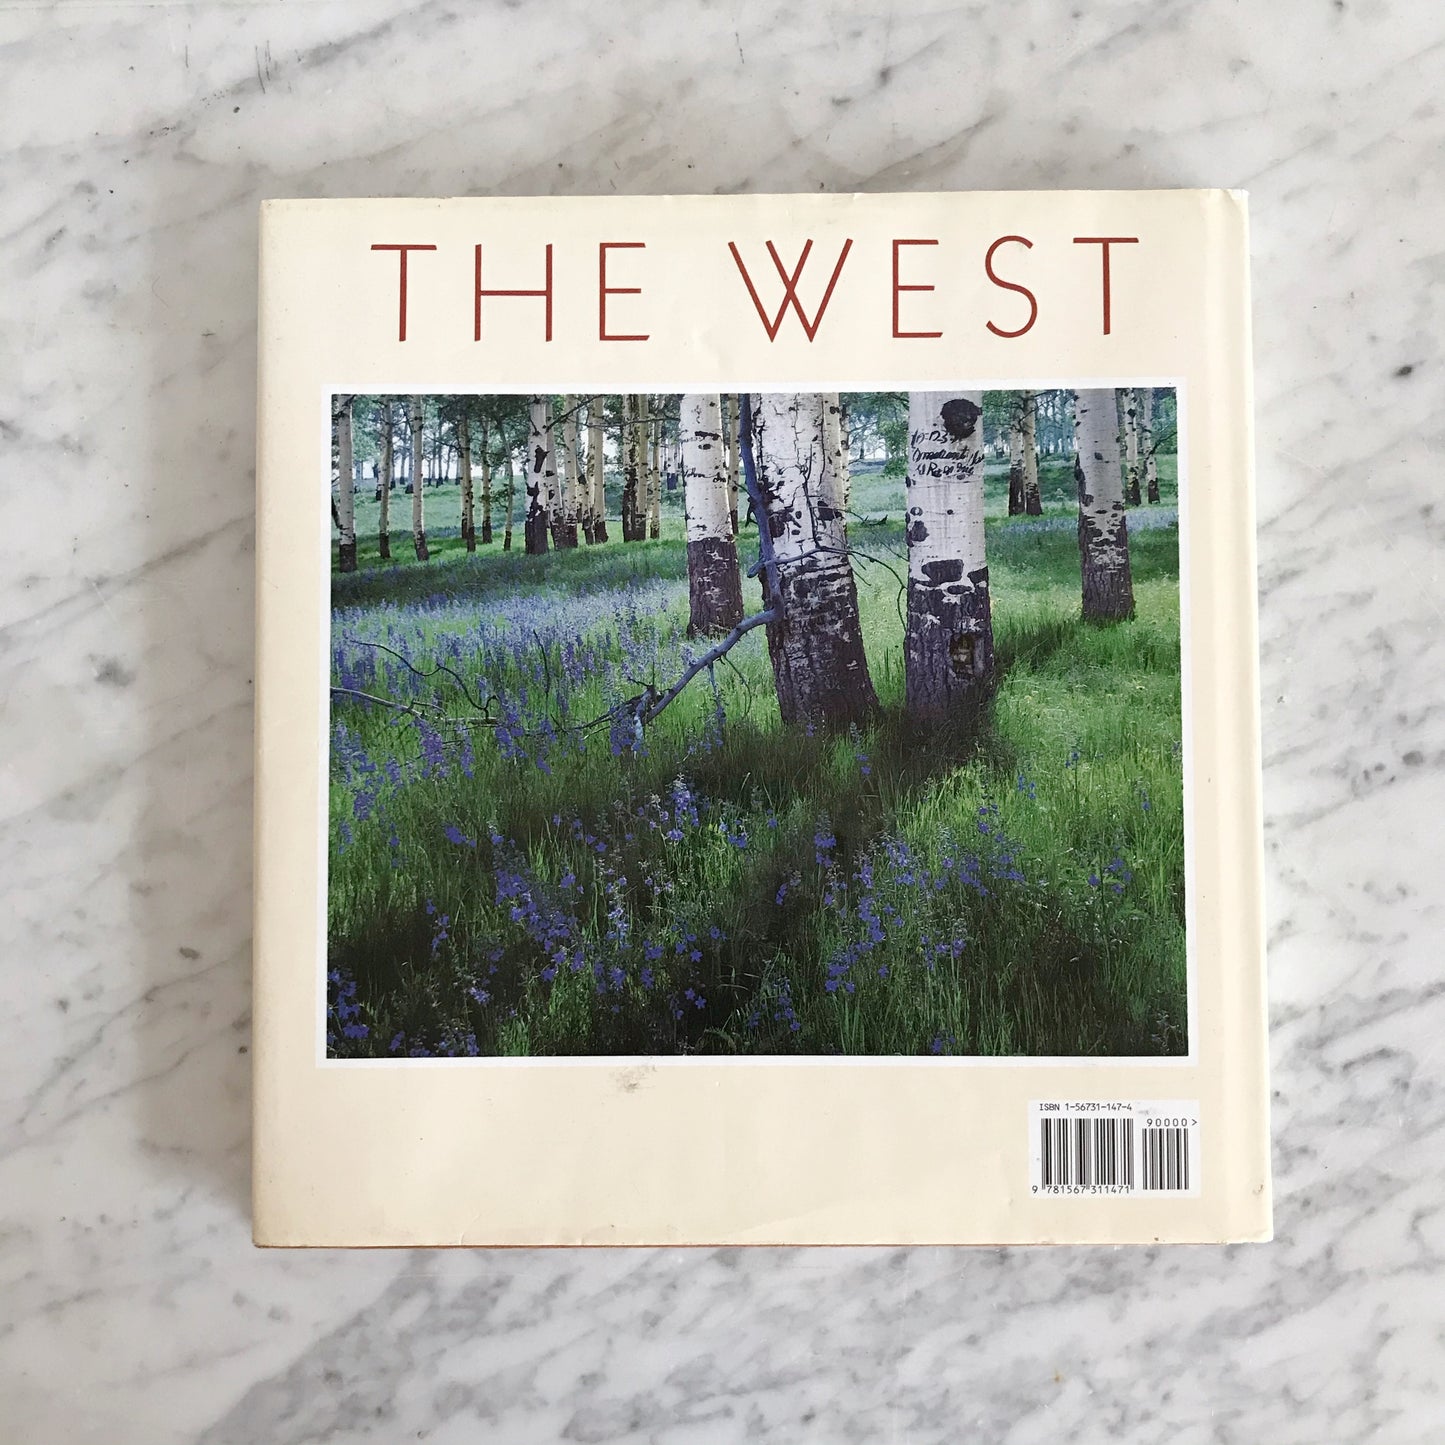 Book: “The West” by Eliot Porter